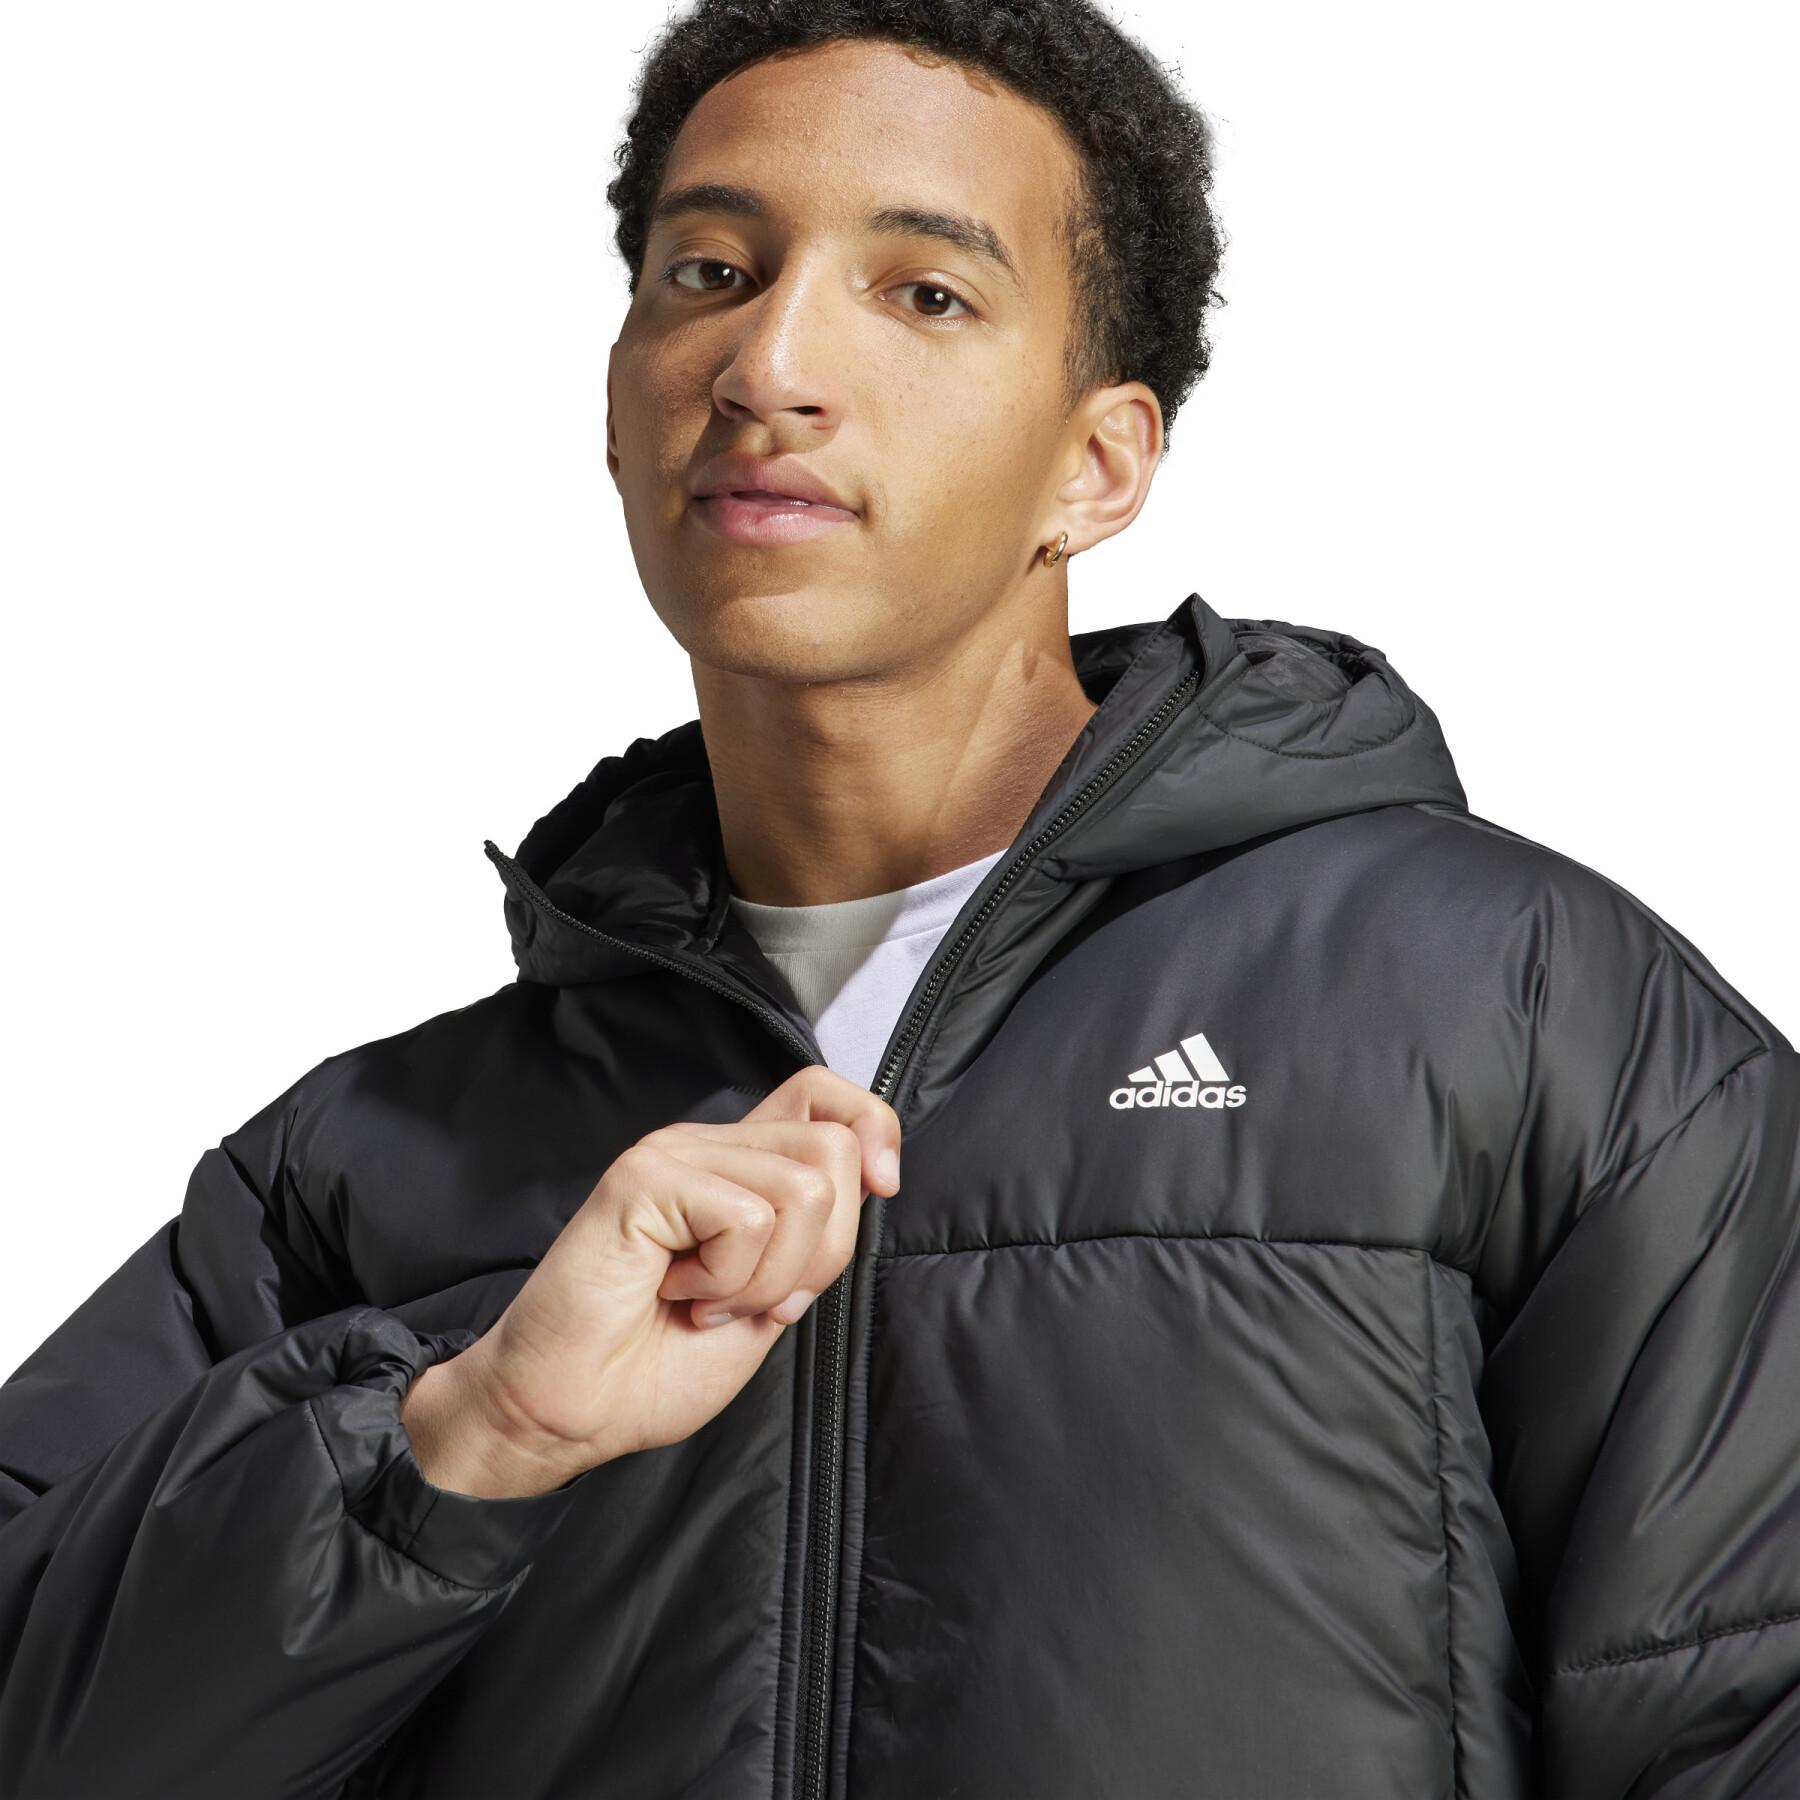 Hooded Puffer Jacket adidas BSC 3-Stripes